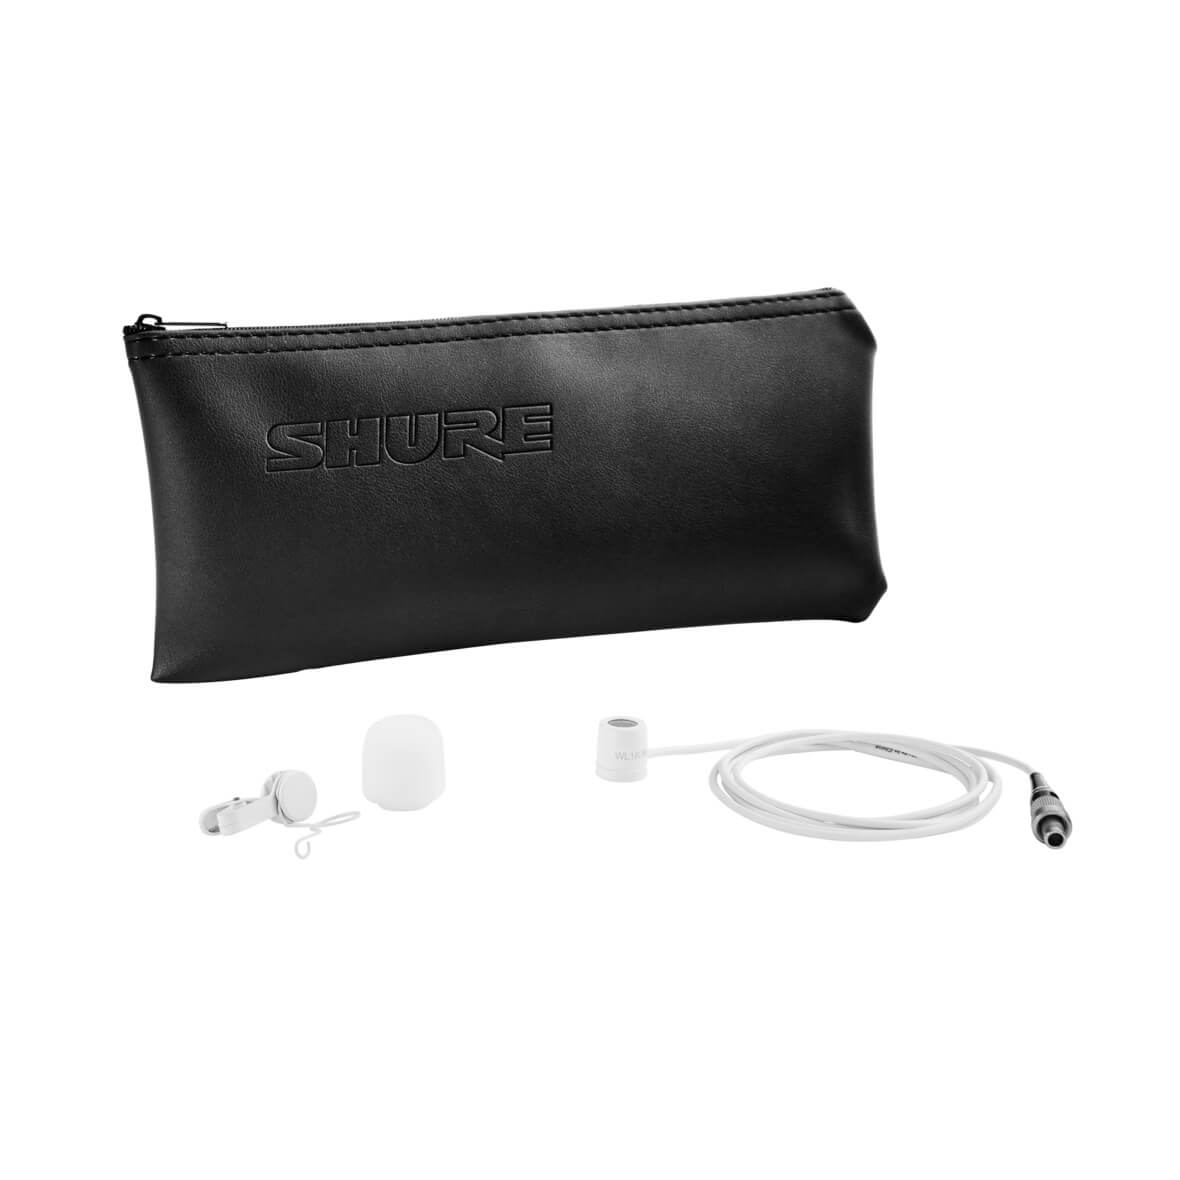 Shure WL183M - Microflex Low-profile Omnidirectional Lavalier Microphone, white with bag